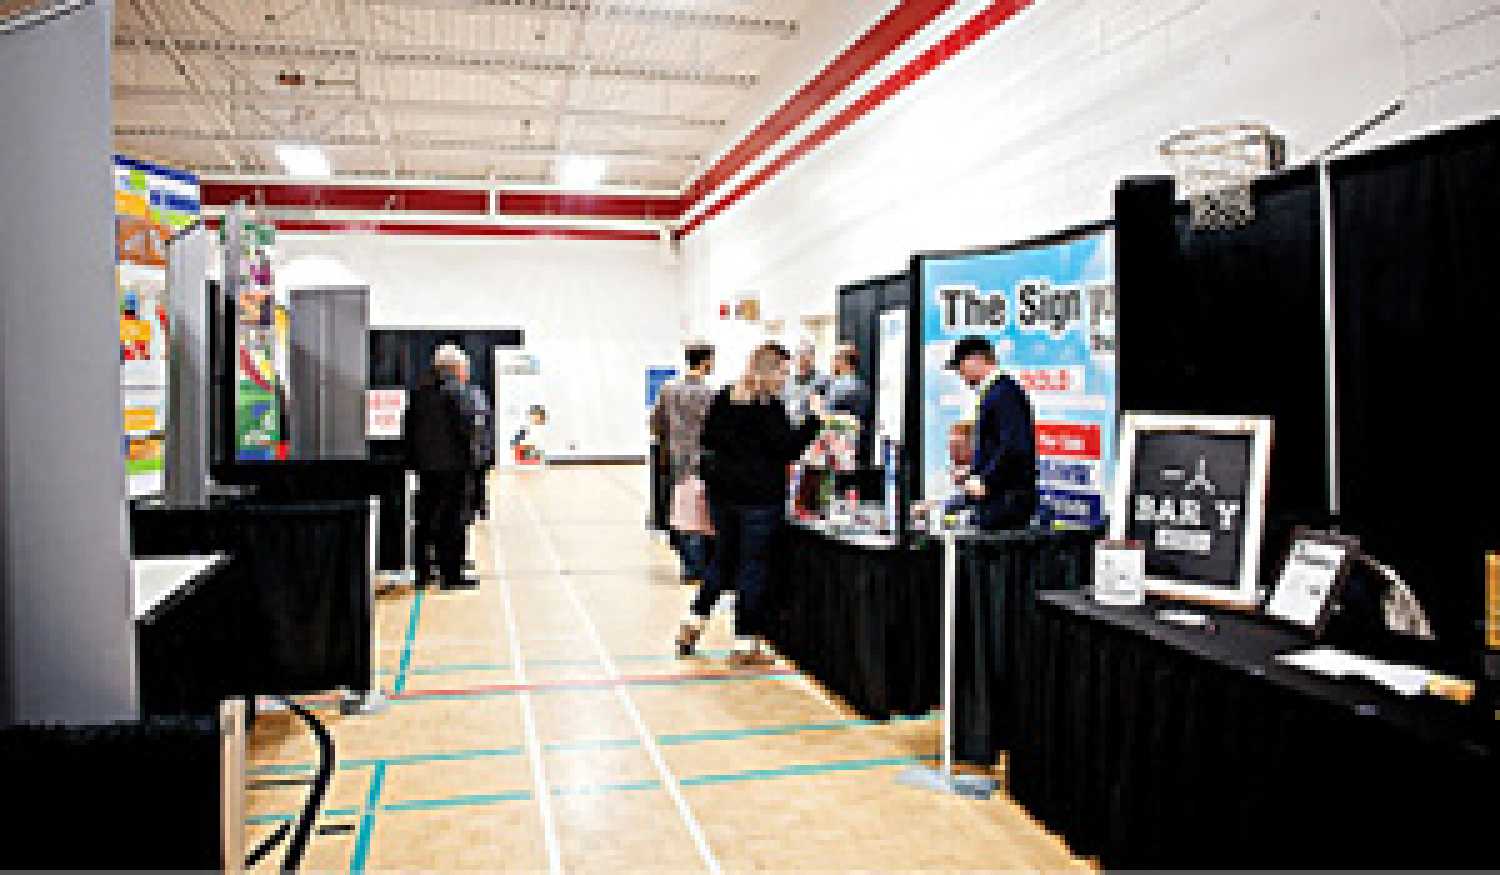 On Wednesday Feb. 8, business owners, start-ups and entrepreneurs are welcomed to attend the Southwest Business Expo in Kola, Manitoba.  The expo is an all-day event and gives local entrepreneurs the opportunity to hear from experienced and successful business owners, as well the chance to network with others. People can register for the event online at: www.swbusinessexpo.com